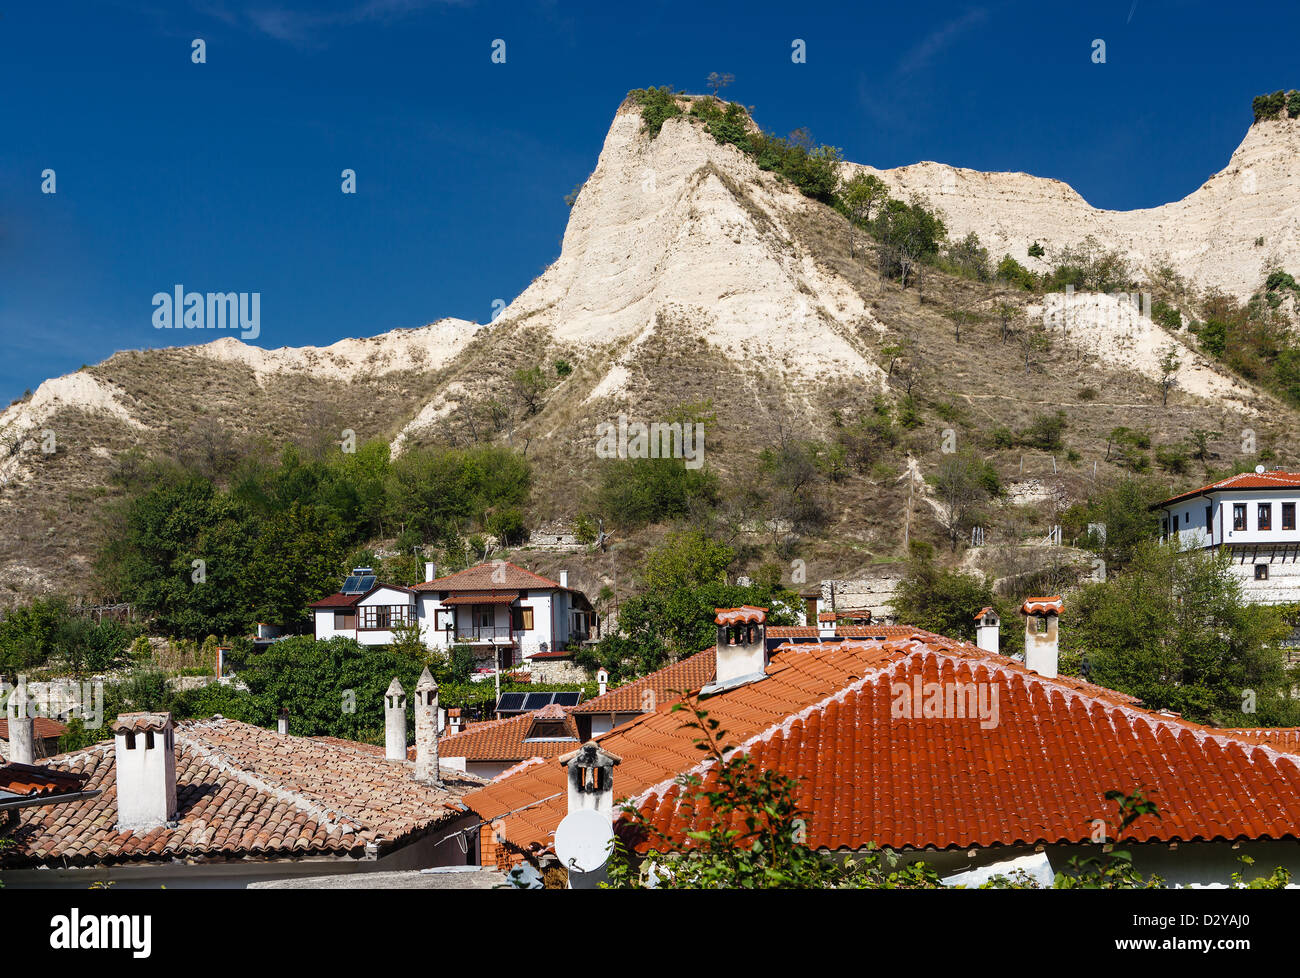 Tile roofs of a small town against chalk rocks Stock Photo